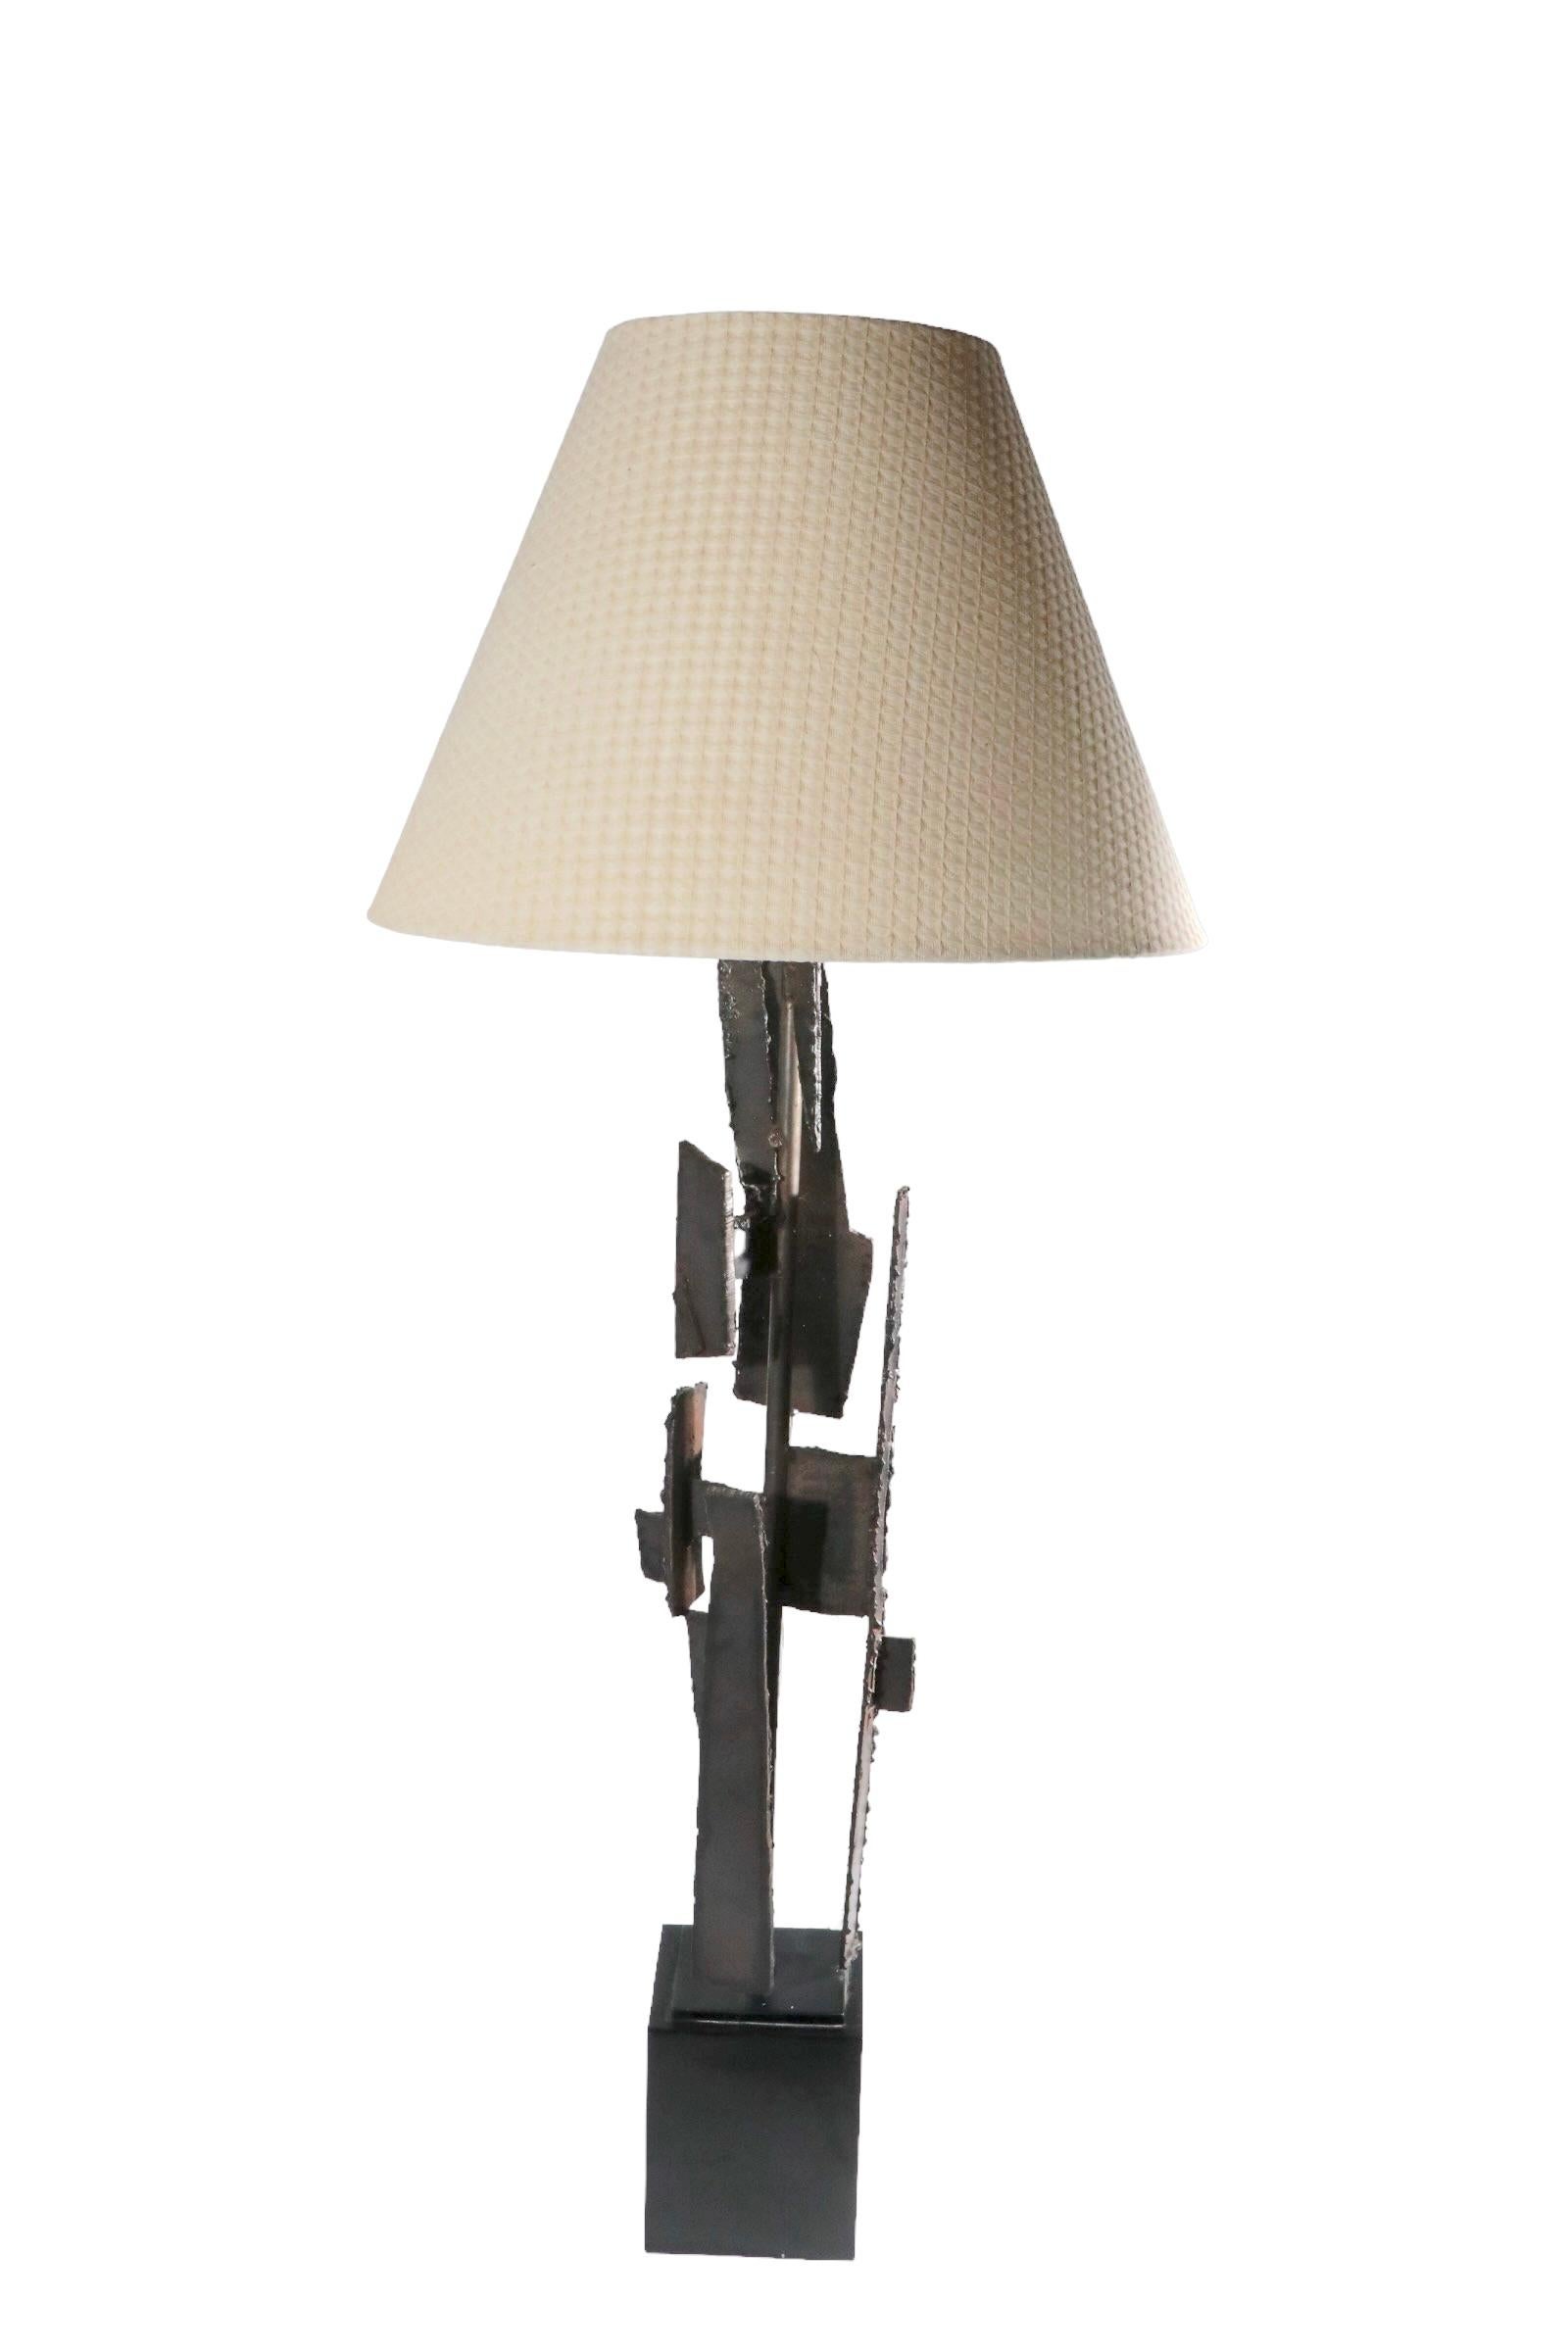 Iron Brutalist Table Lamp by Harry Balmer for the Laurel Lamp Company, ca. 1970's For Sale